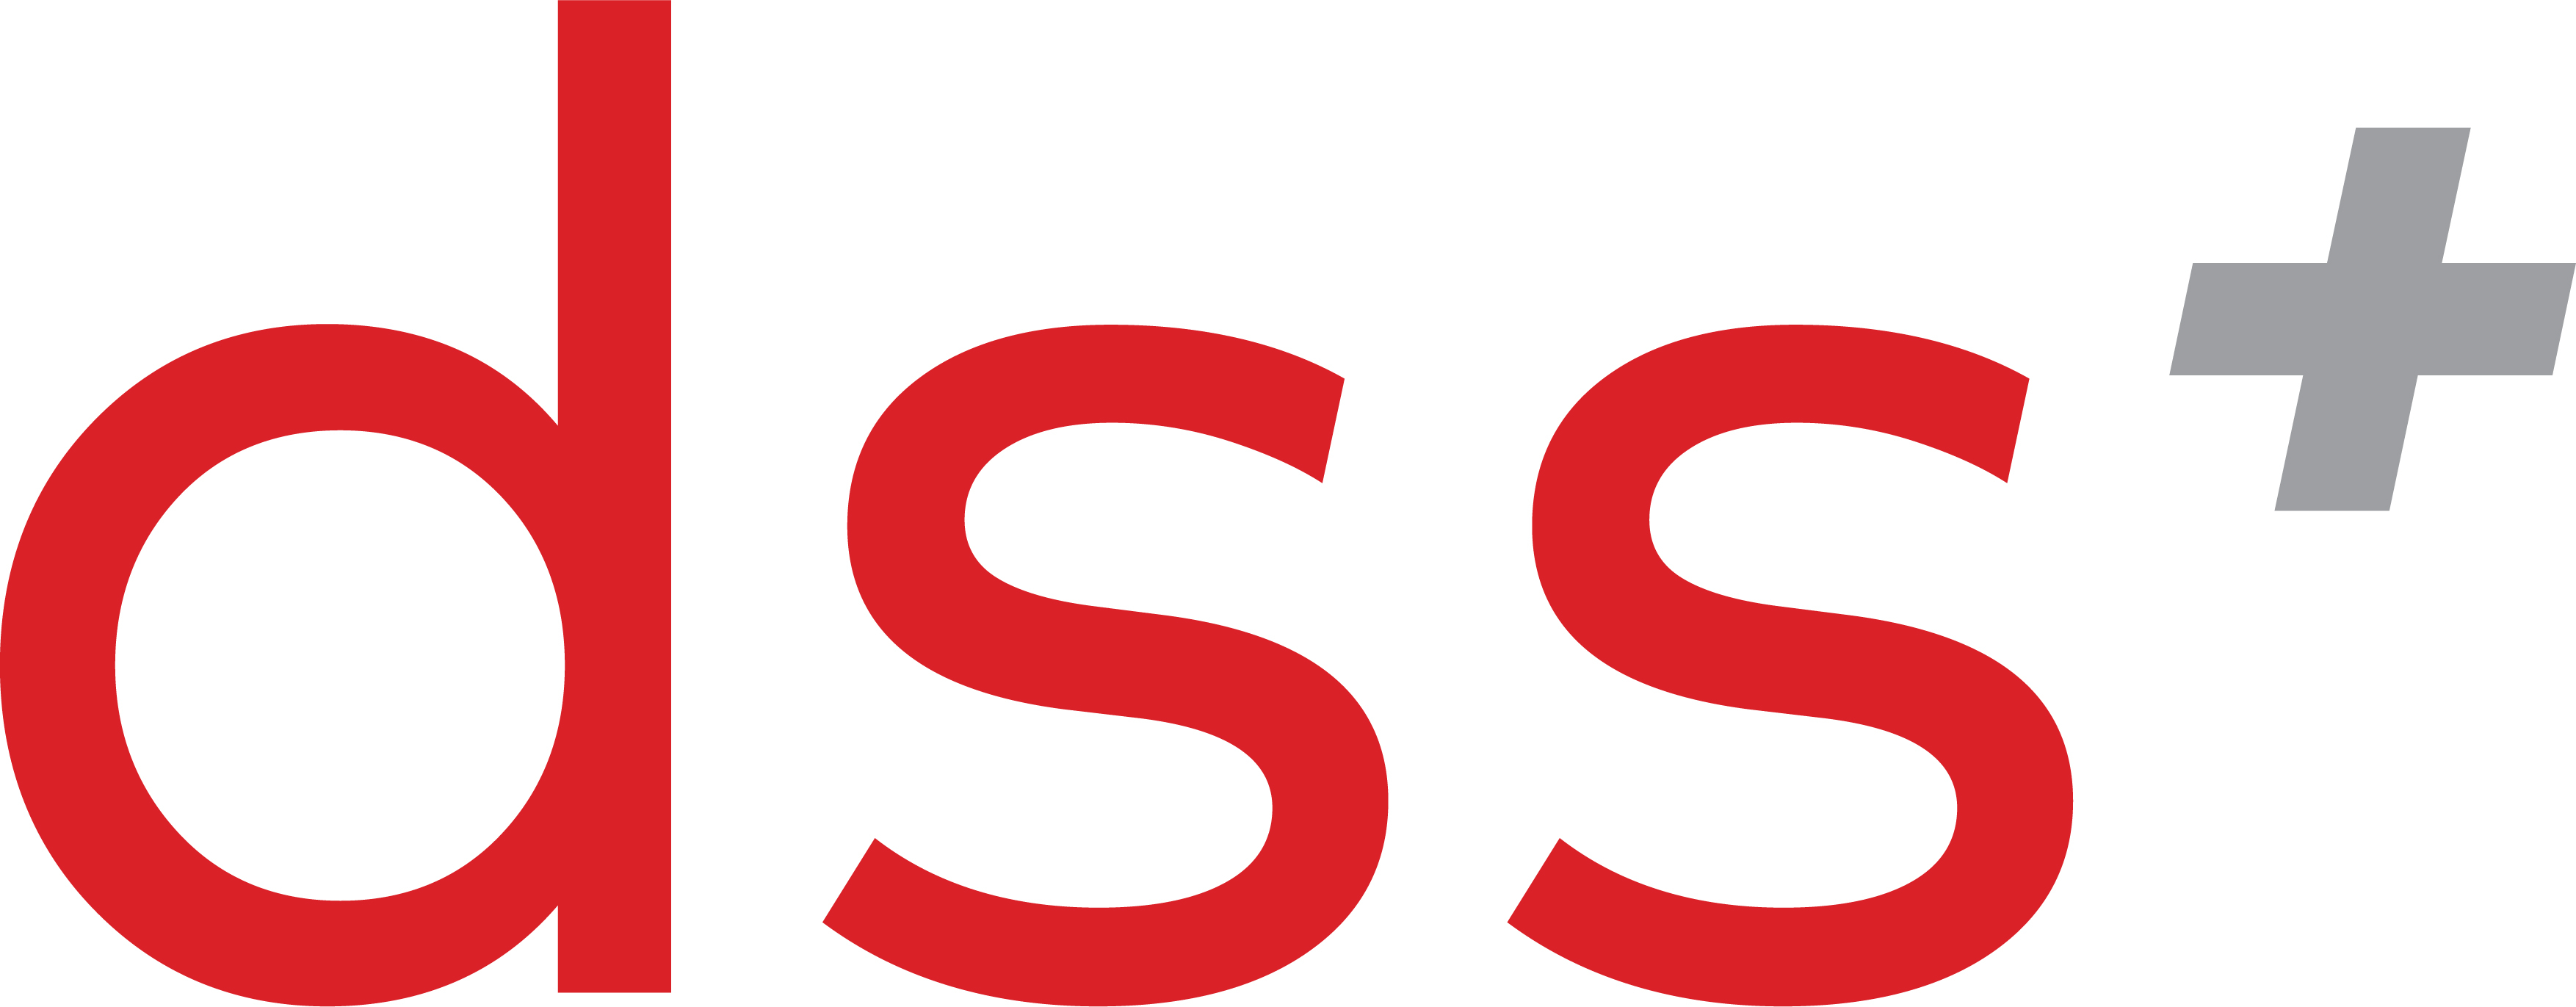 Dss+ (dupont Sustainable Solutions)